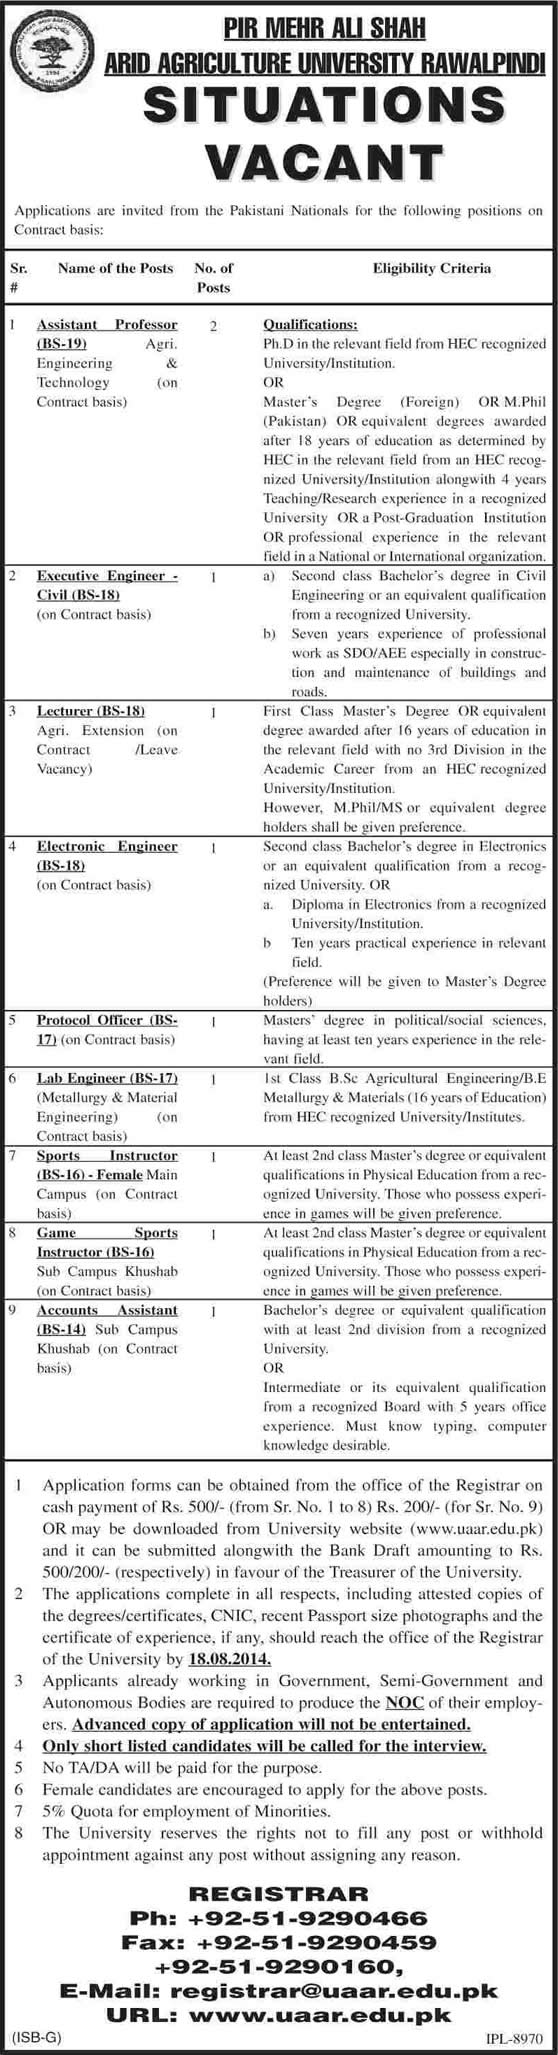 Arid Agriculture University Rawalpindi Jobs 2014 July for Teaching Faculty & Non-Teaching Staff